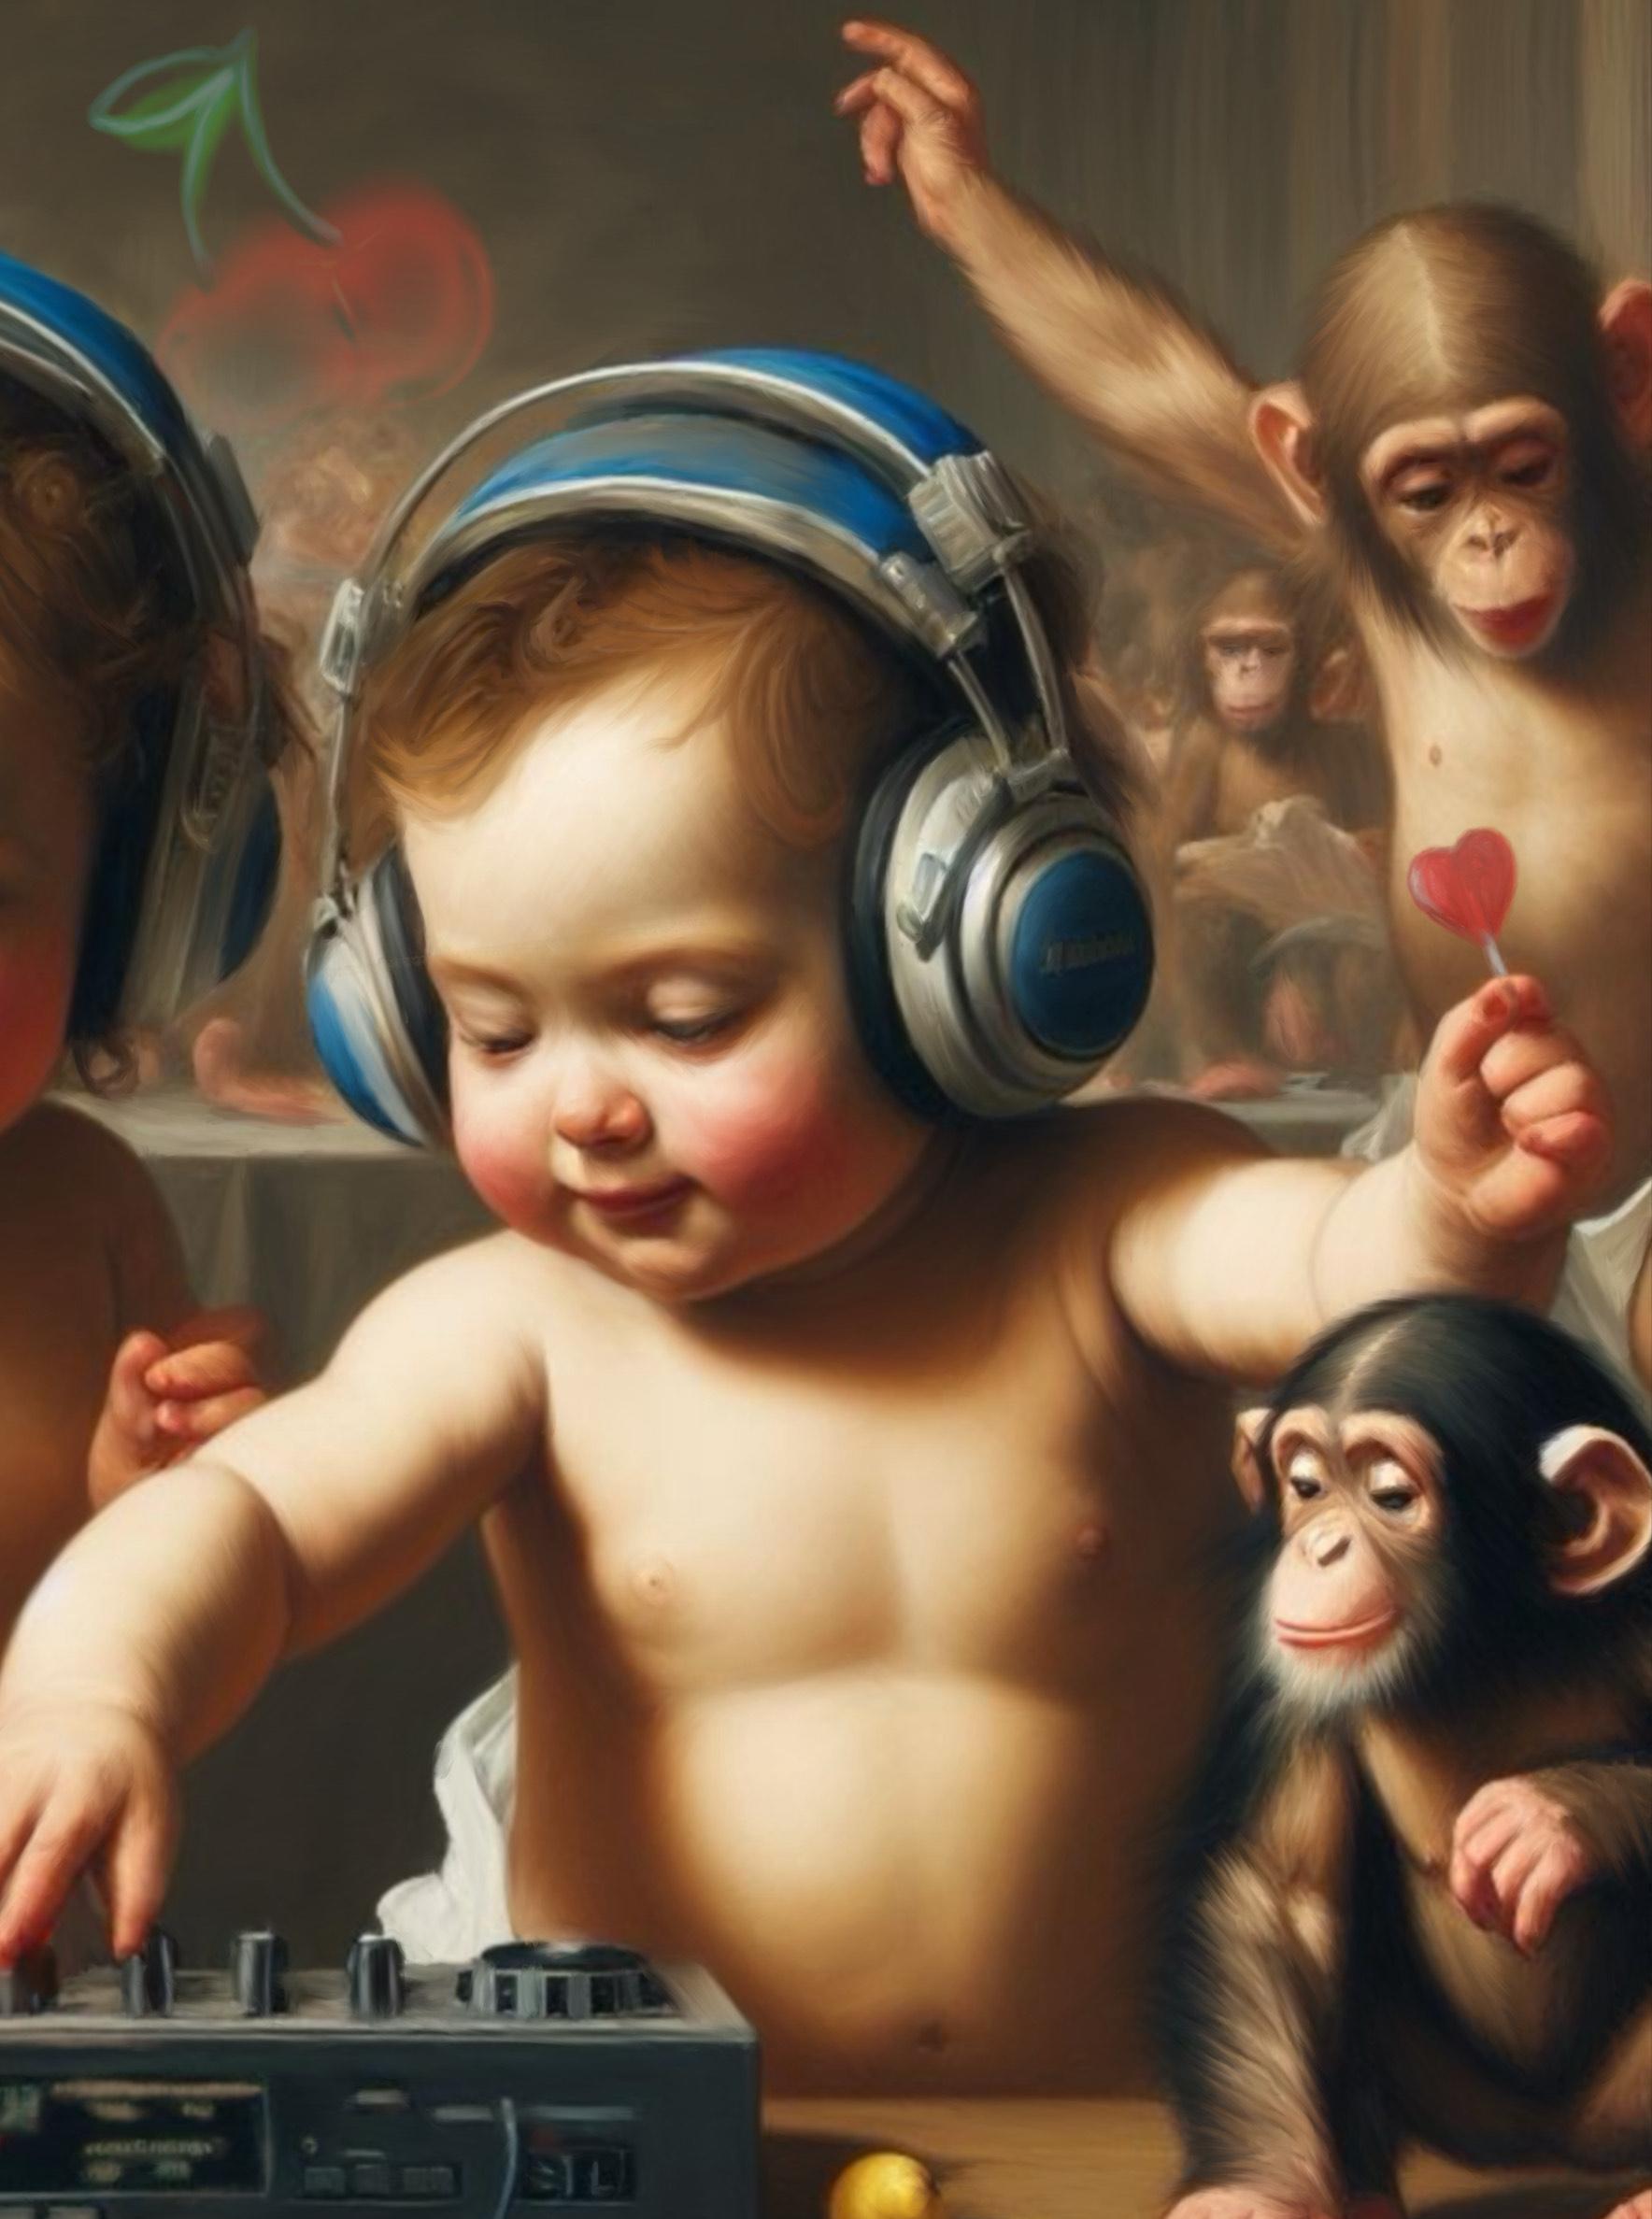 Babies DJ. 
Funny and touching image composed by Spanish artist Pablo de Pinini as a reinterpretation of past masterpieces, in which contemporary or futuristic elements burst in in unexpected and provocative ways.
Fine Art Giclée Pigmented Inkjet.